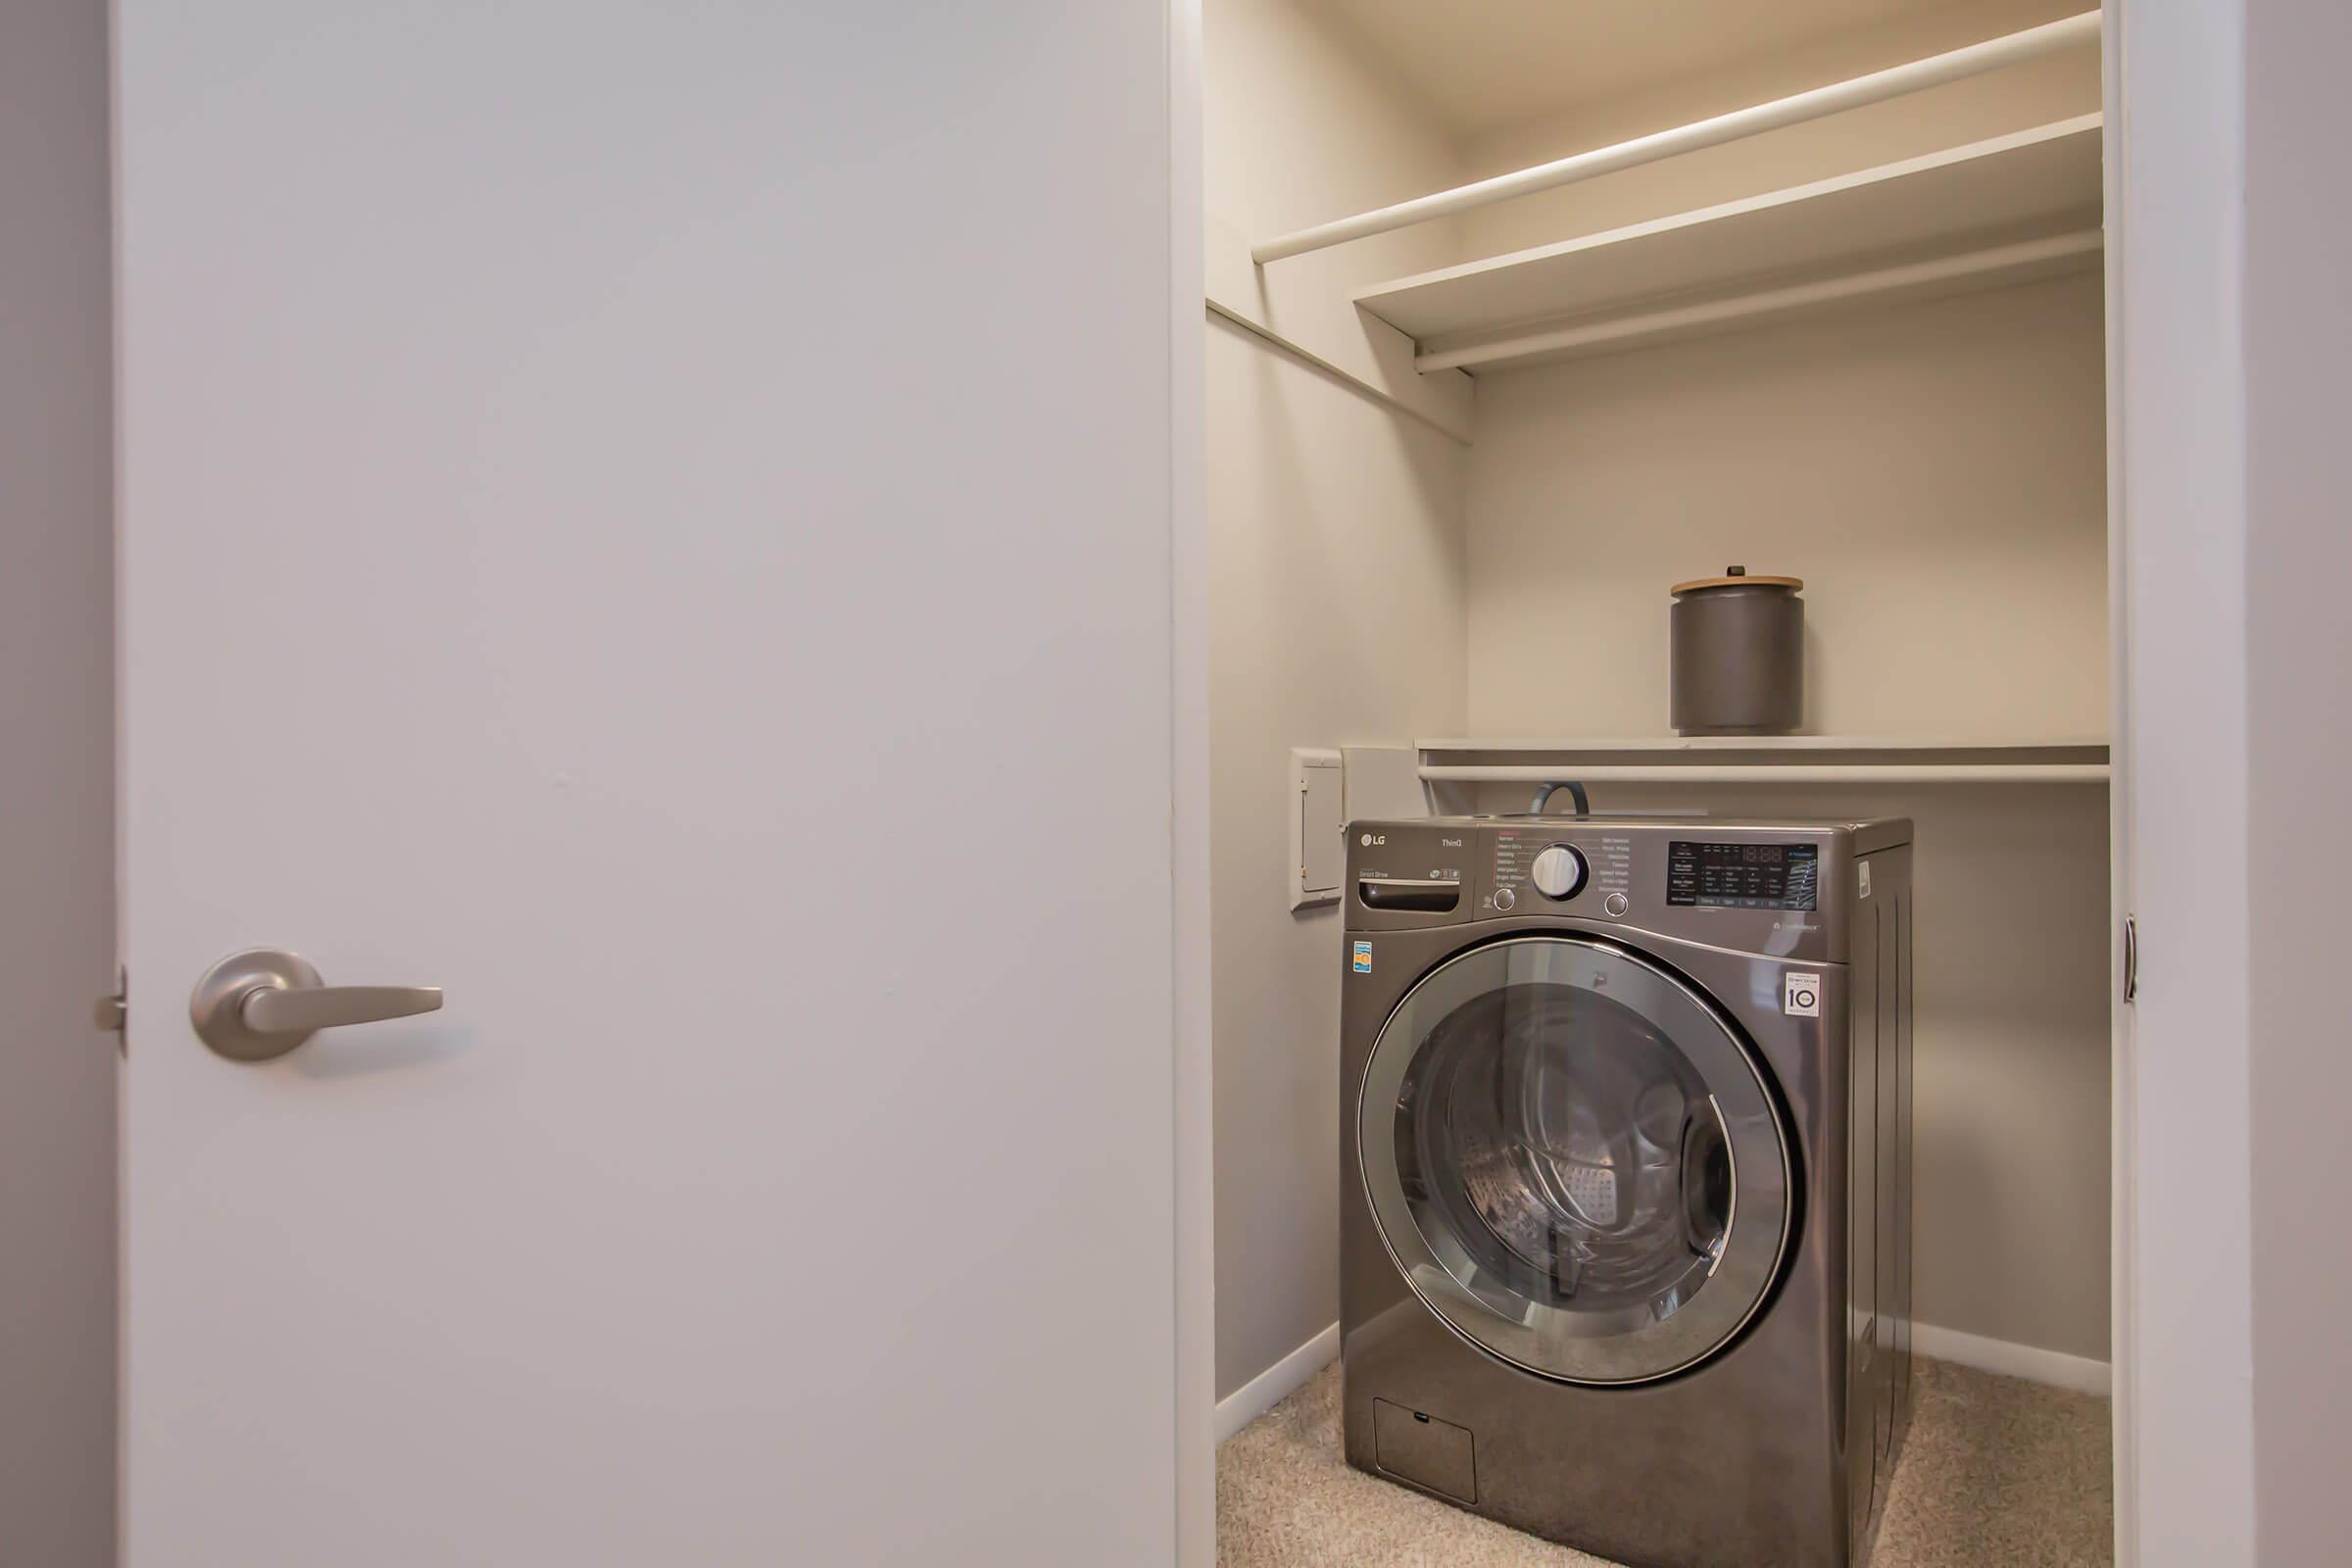 EASY ACCESS WASHER AND DRYER IN HOME